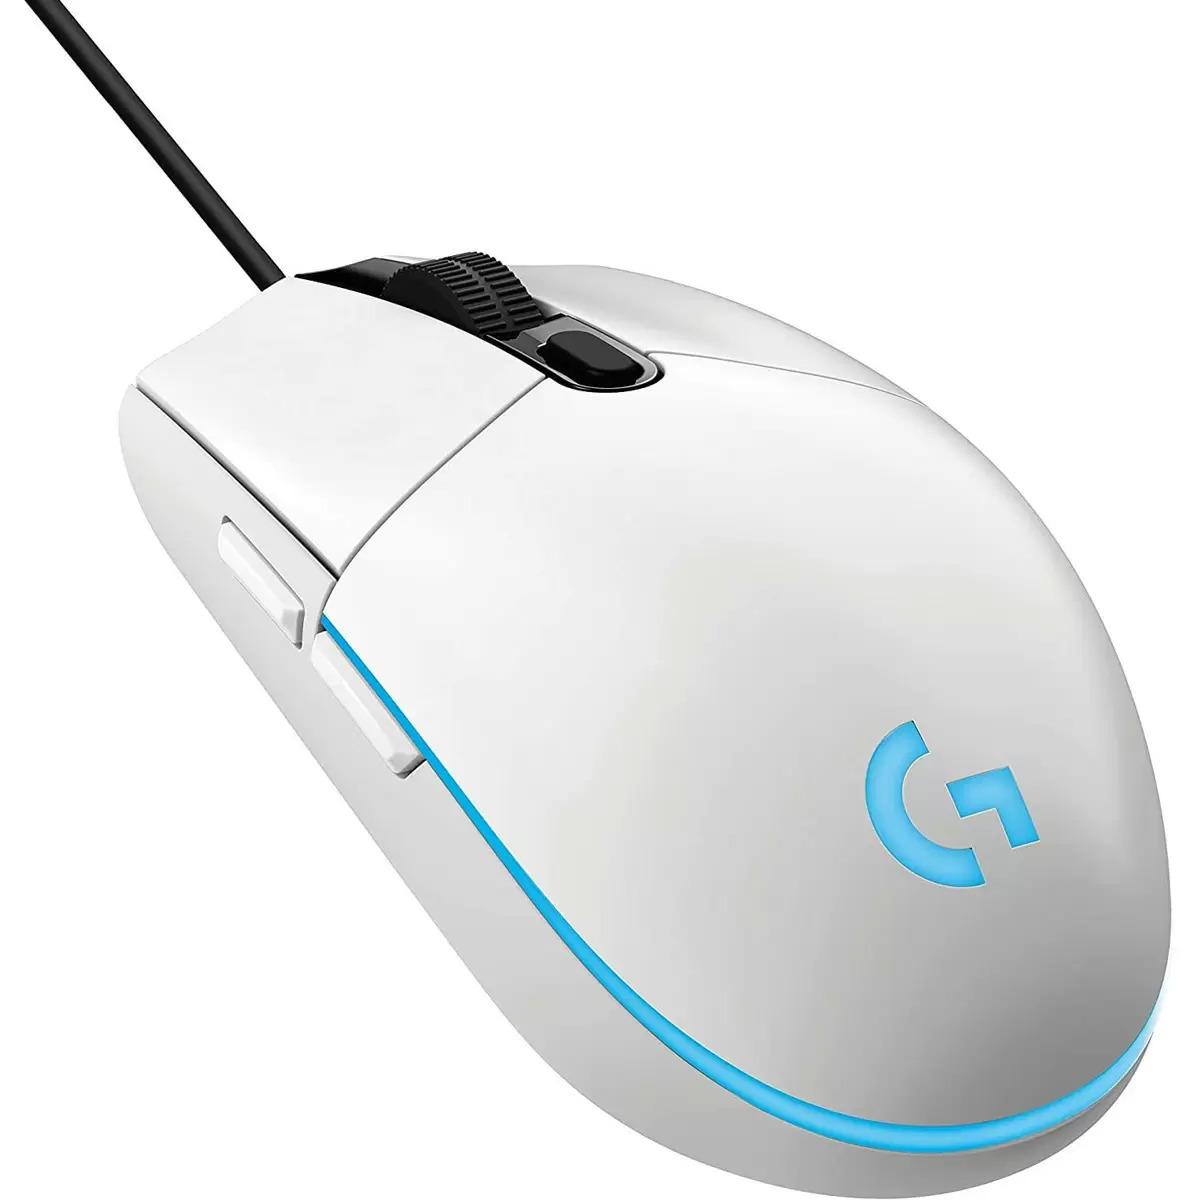 Logitech G203 Lightsync Wired Optical Gaming Mouse for $20.28